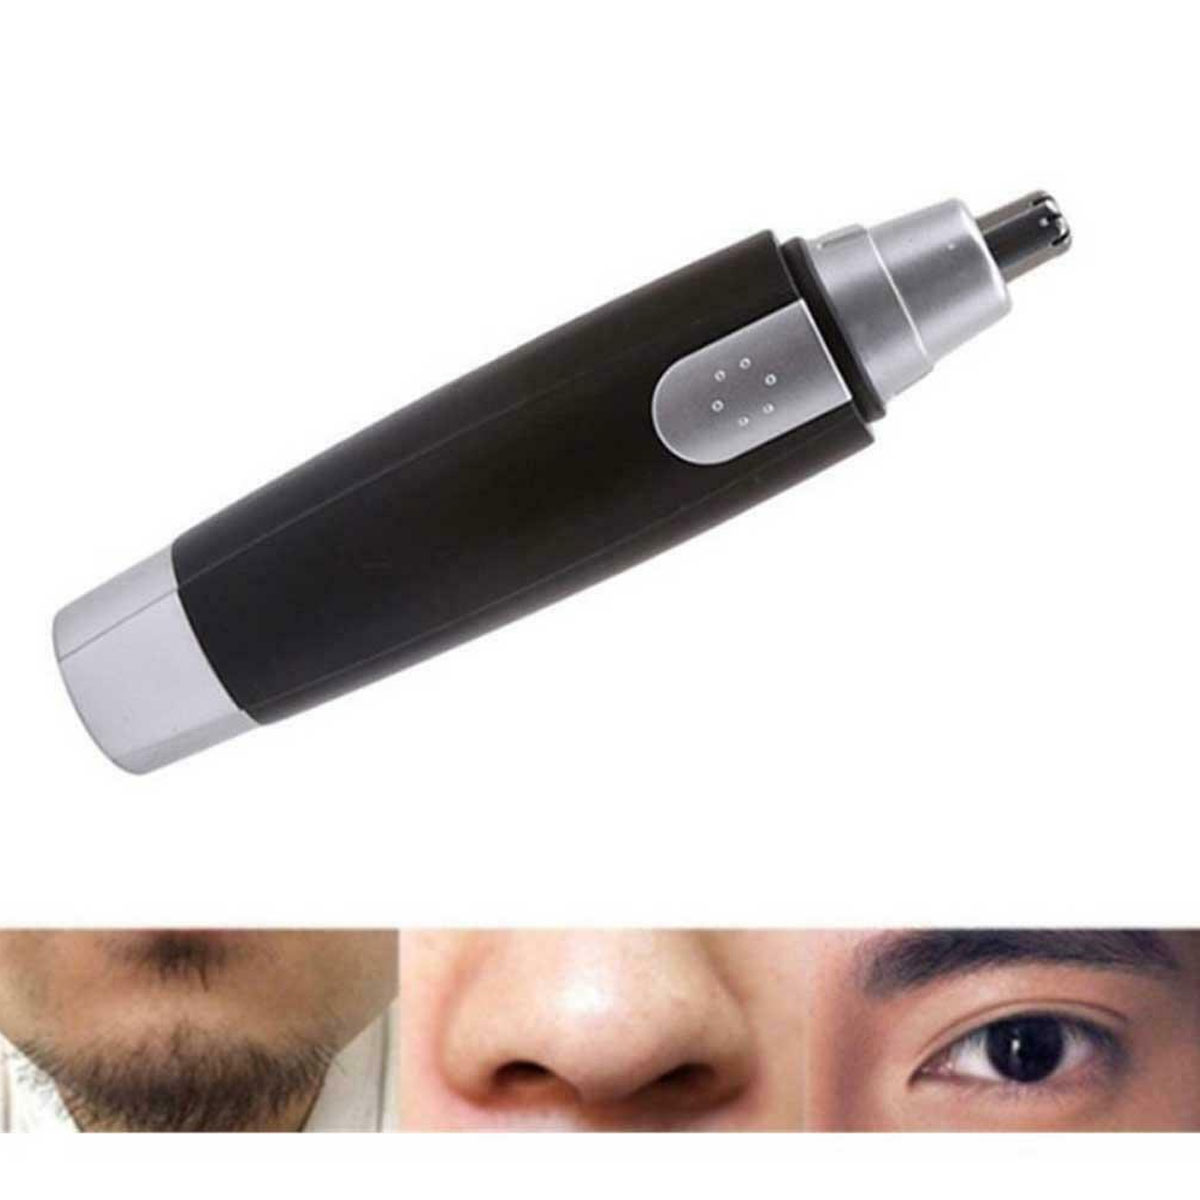 Personal-Trimmer-Nose-Hair-Ear-Eyebrow-Neck-Remover-Groomer-Micro-Shaver-Touch-1606035-6